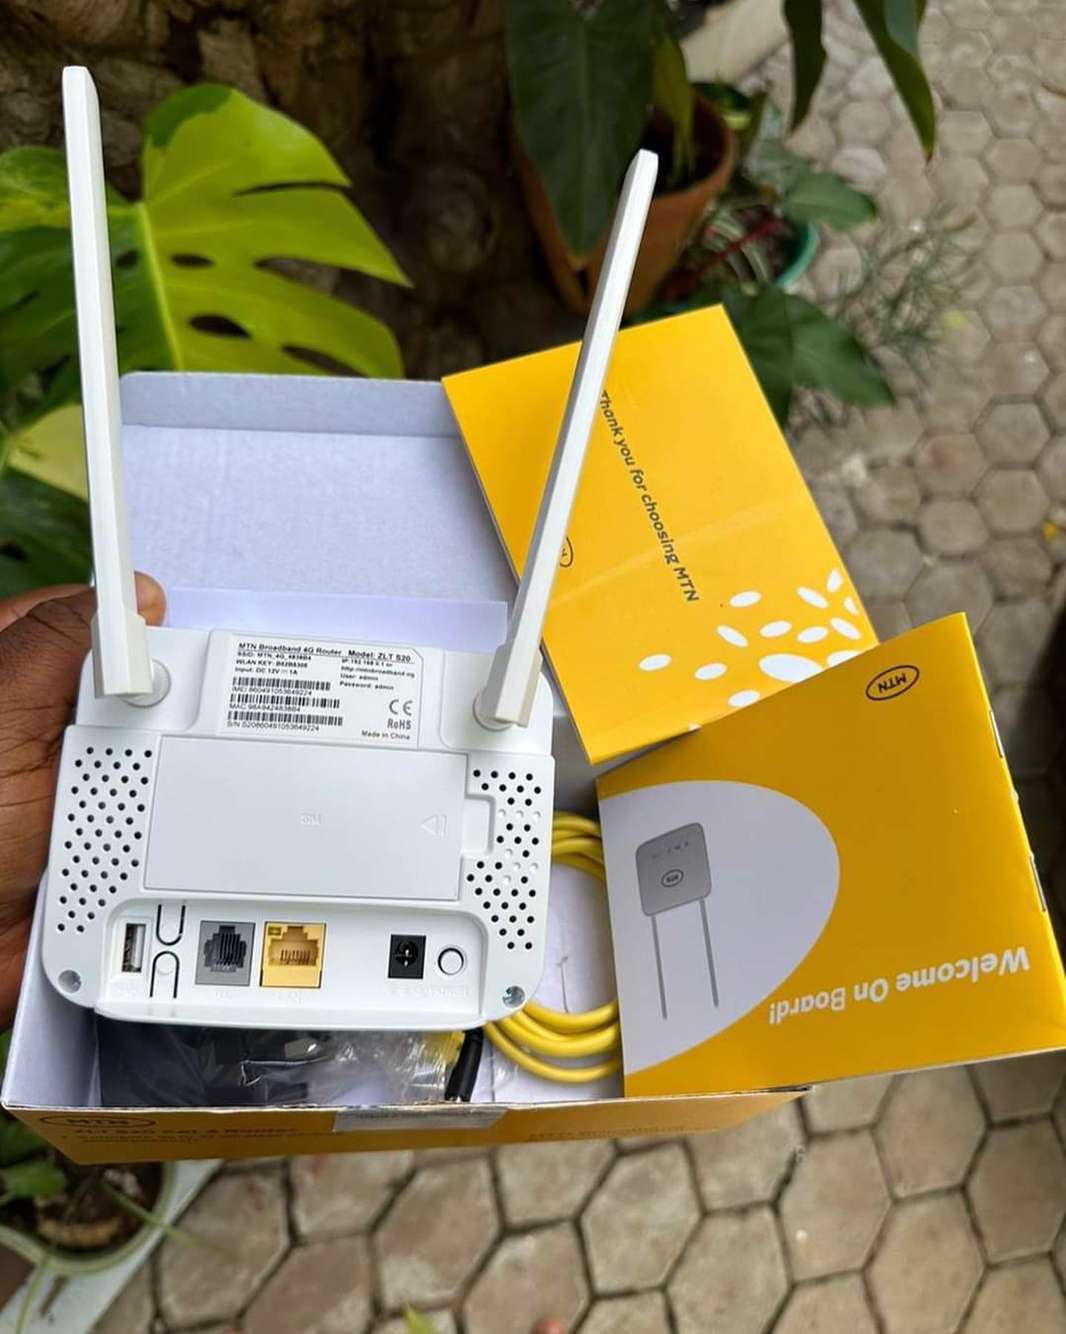 Universal 4G LTE Router (Enjoy a very fast and stable internet connection)